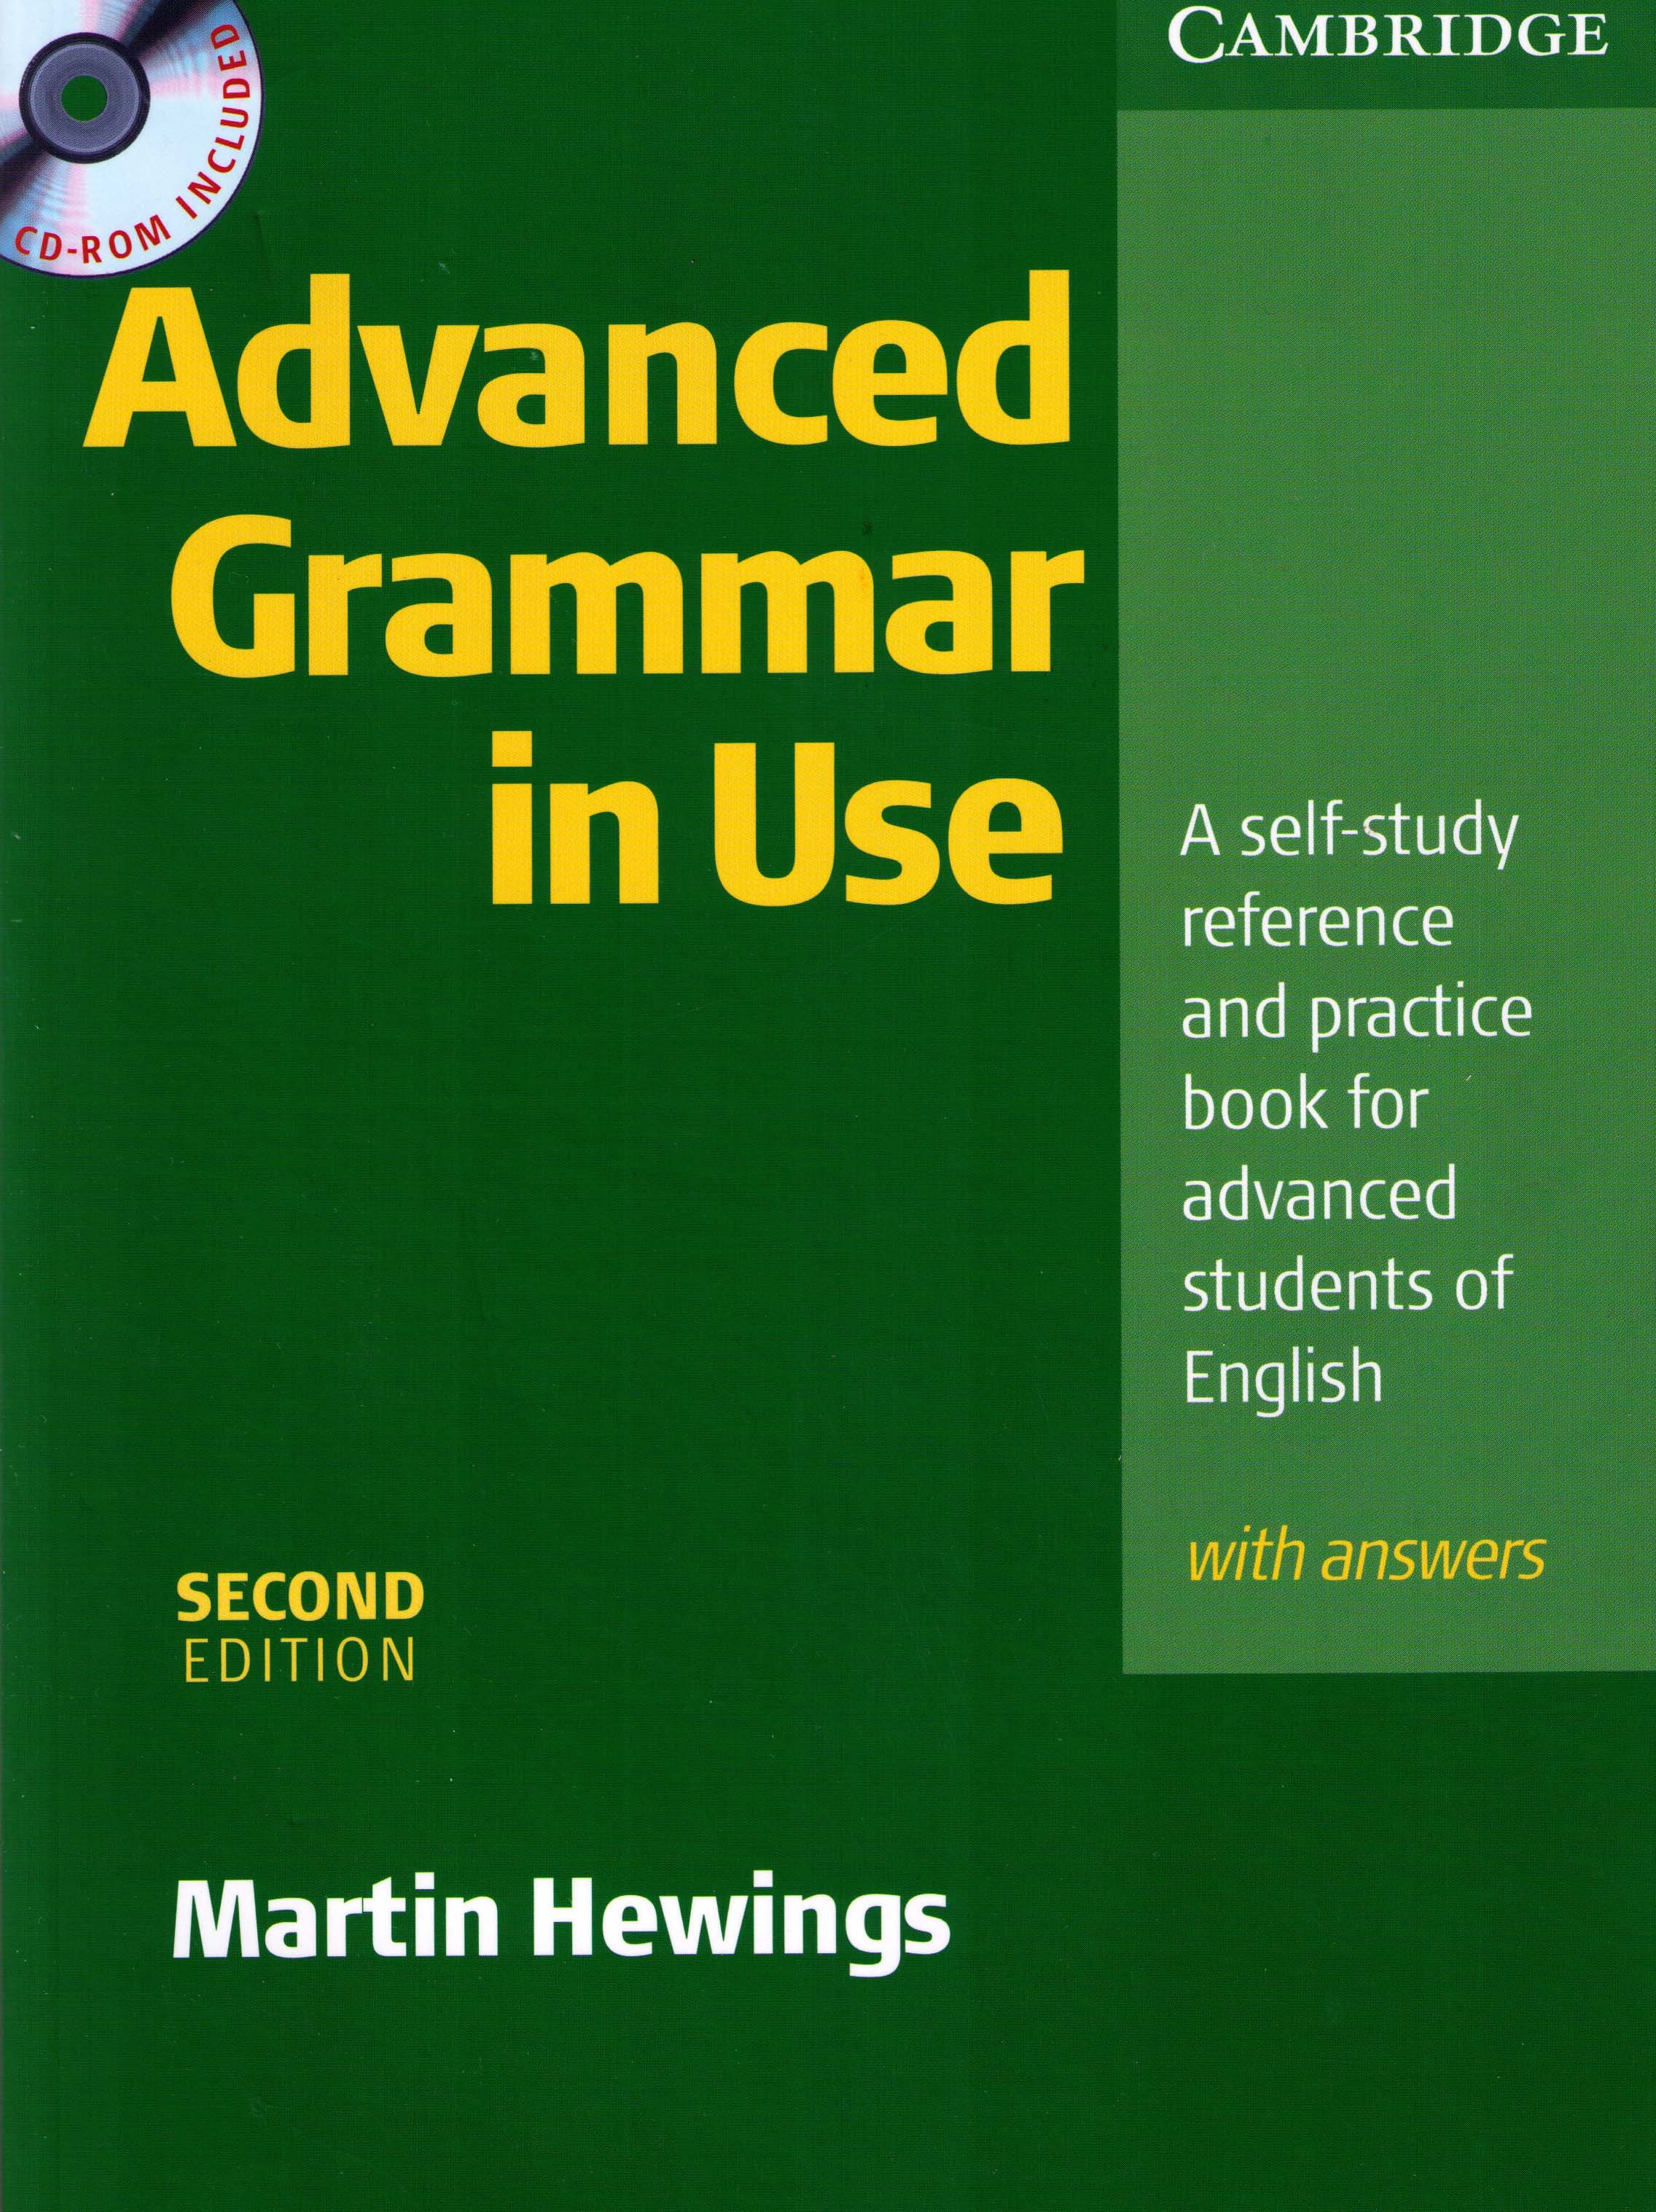 Advanced Grammar in Use: Martin Hewings: English Course Book Review by